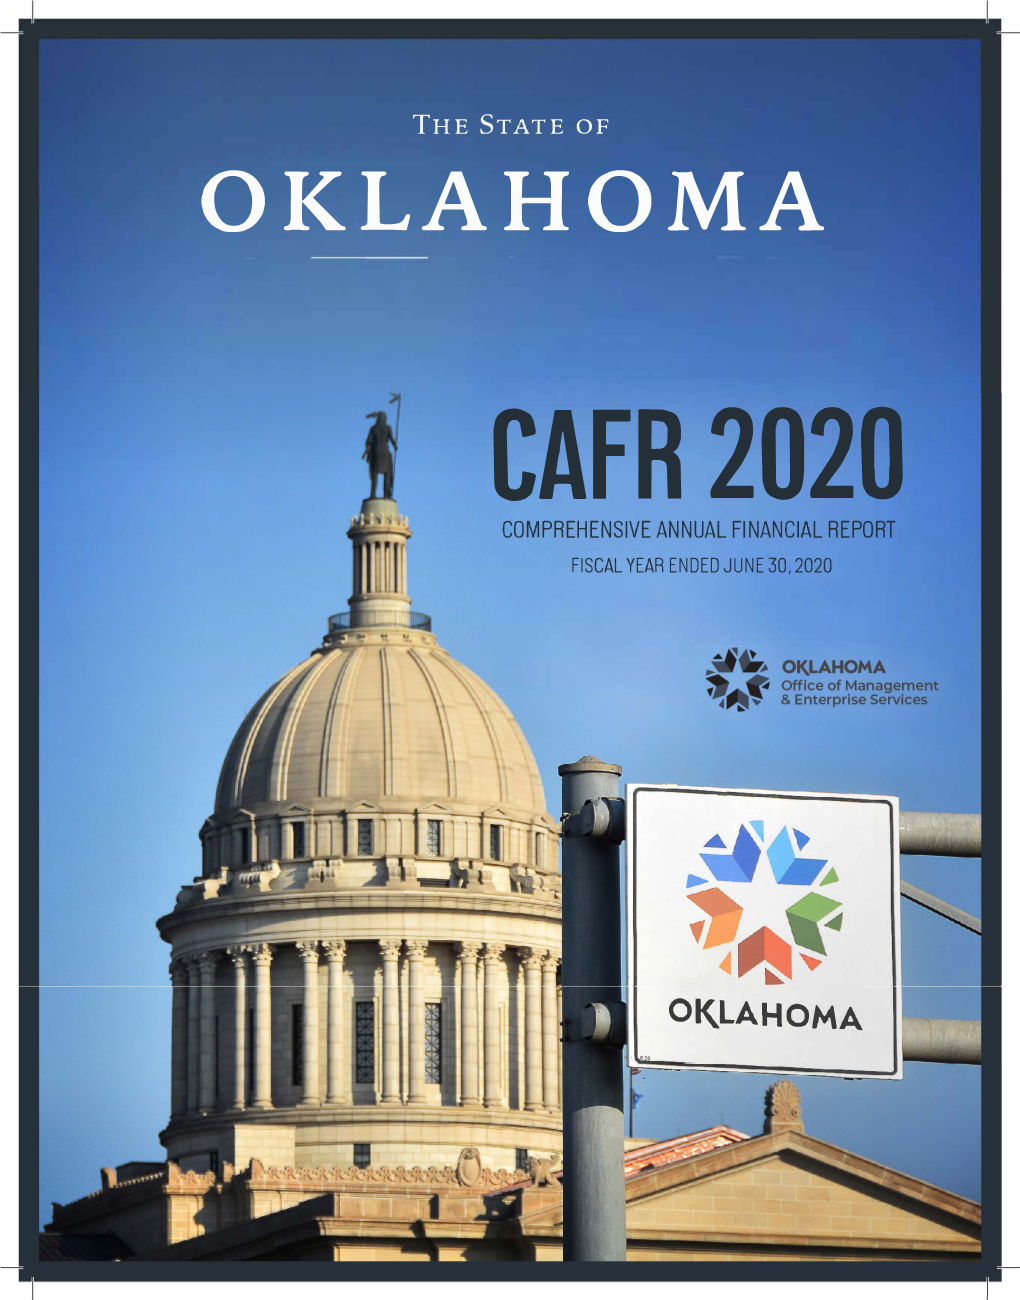 Cafr 2020 Comprehensive Annual Financial Report Fiscal Year Ended June 30, 2020